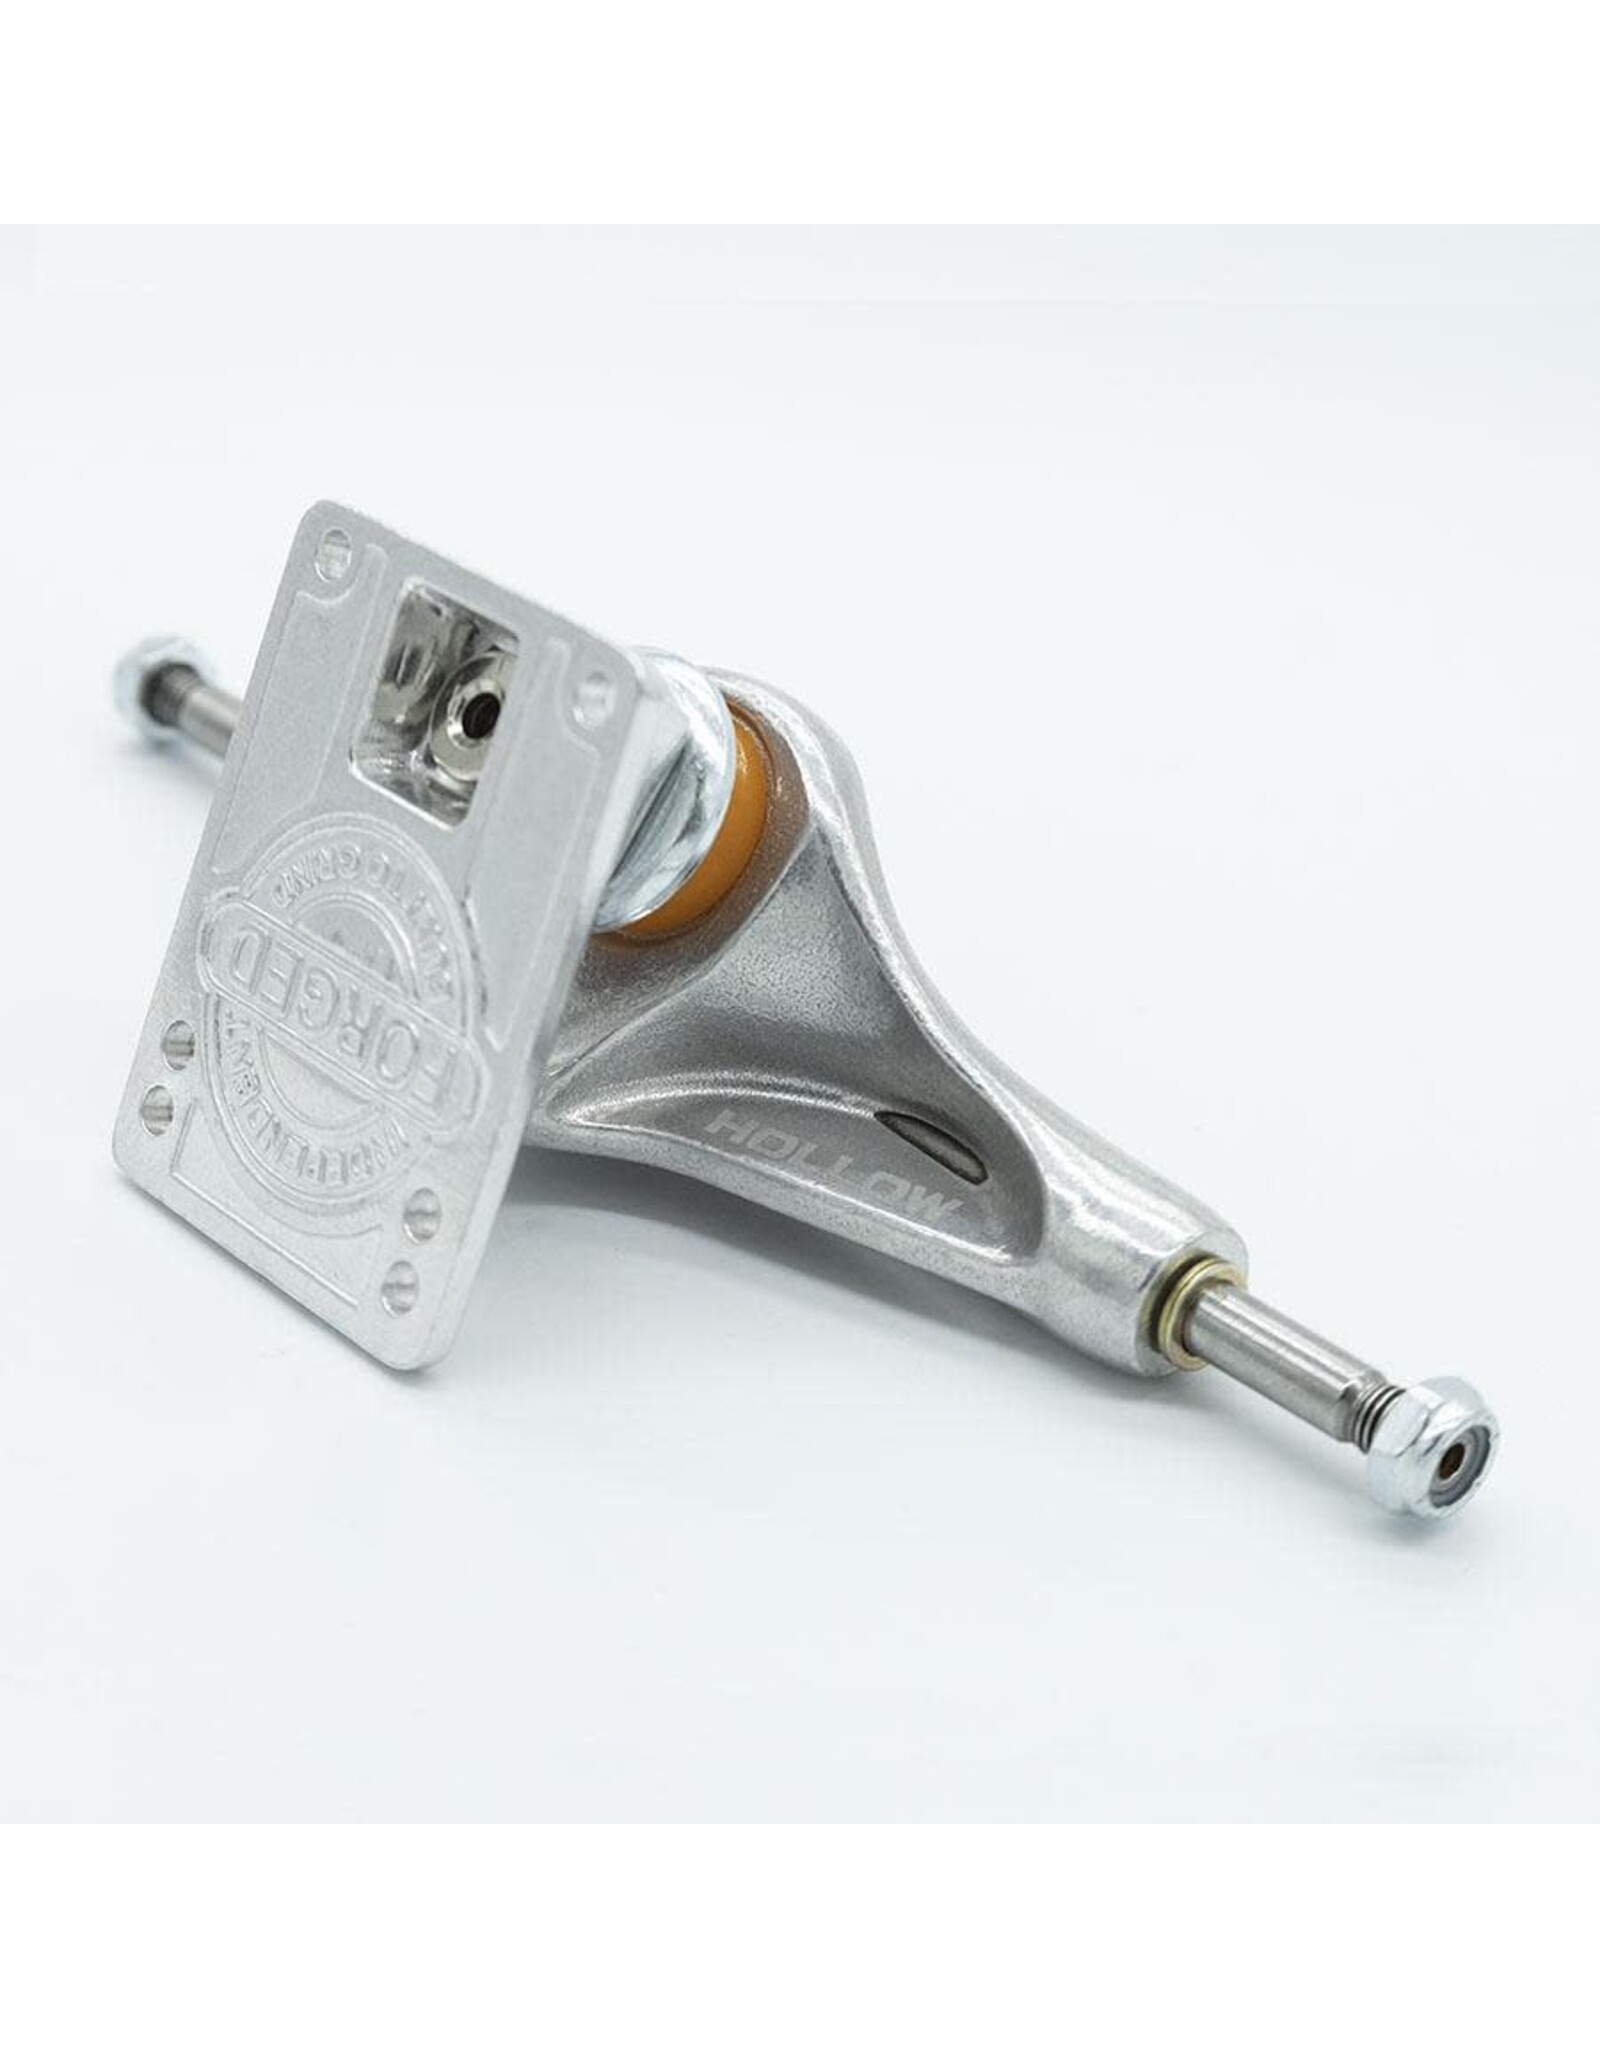 INDEPENDENT Stage 11.159 Forged Hollow Silver Standard Independent Skateboard Trucks